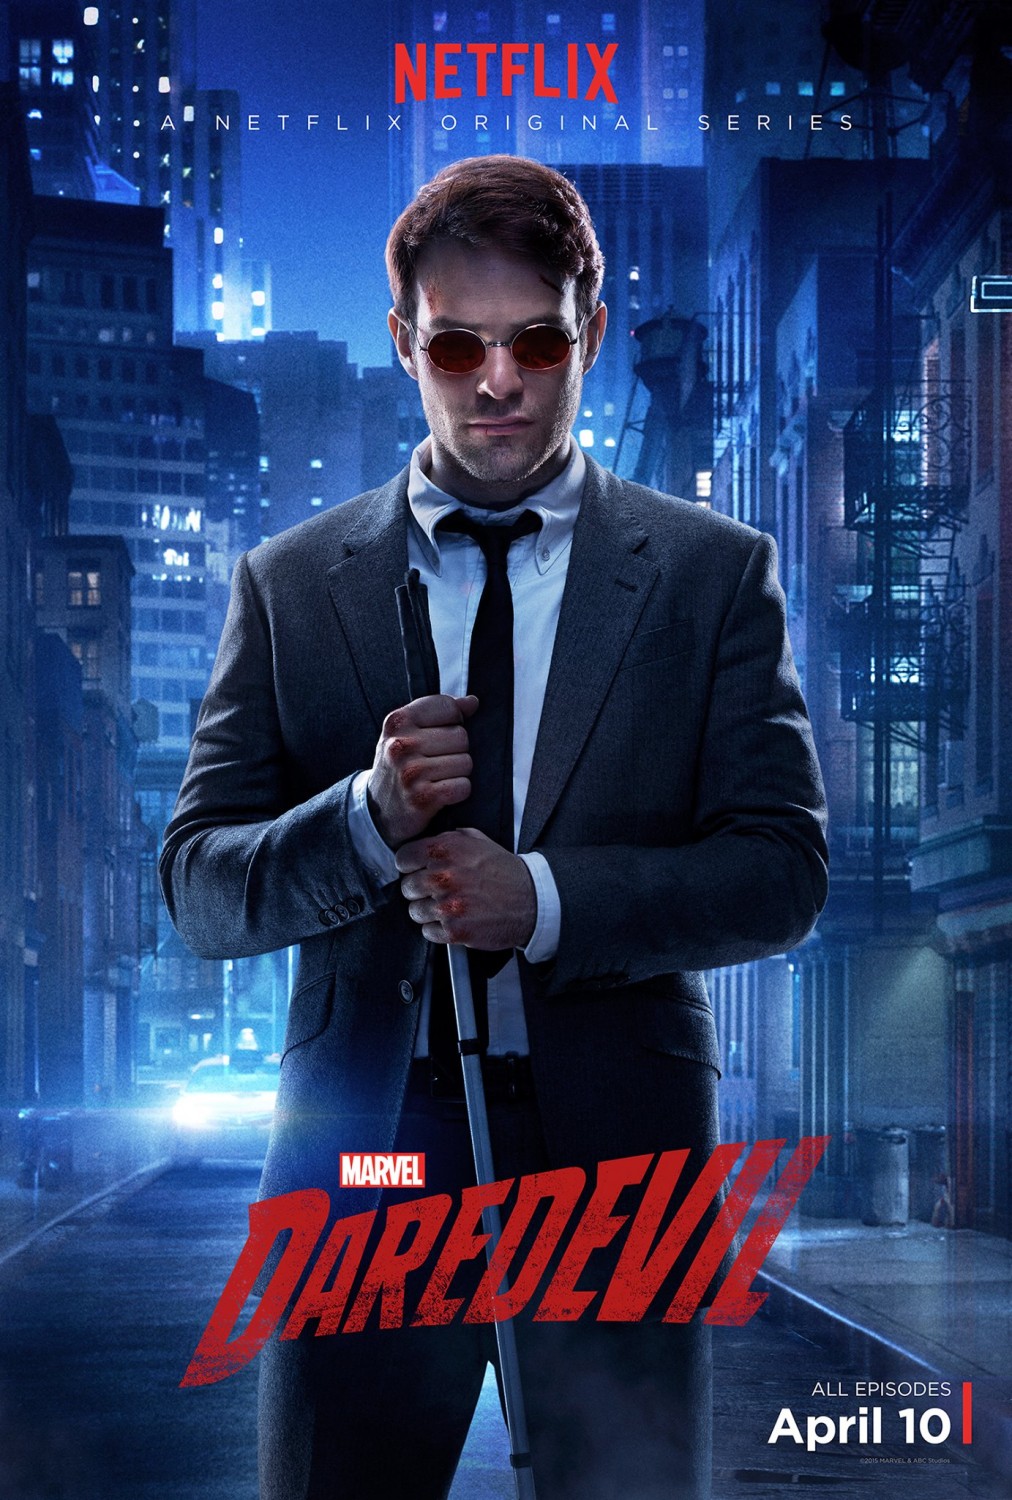 Extra Large TV Poster Image for Daredevil (#4 of 24)